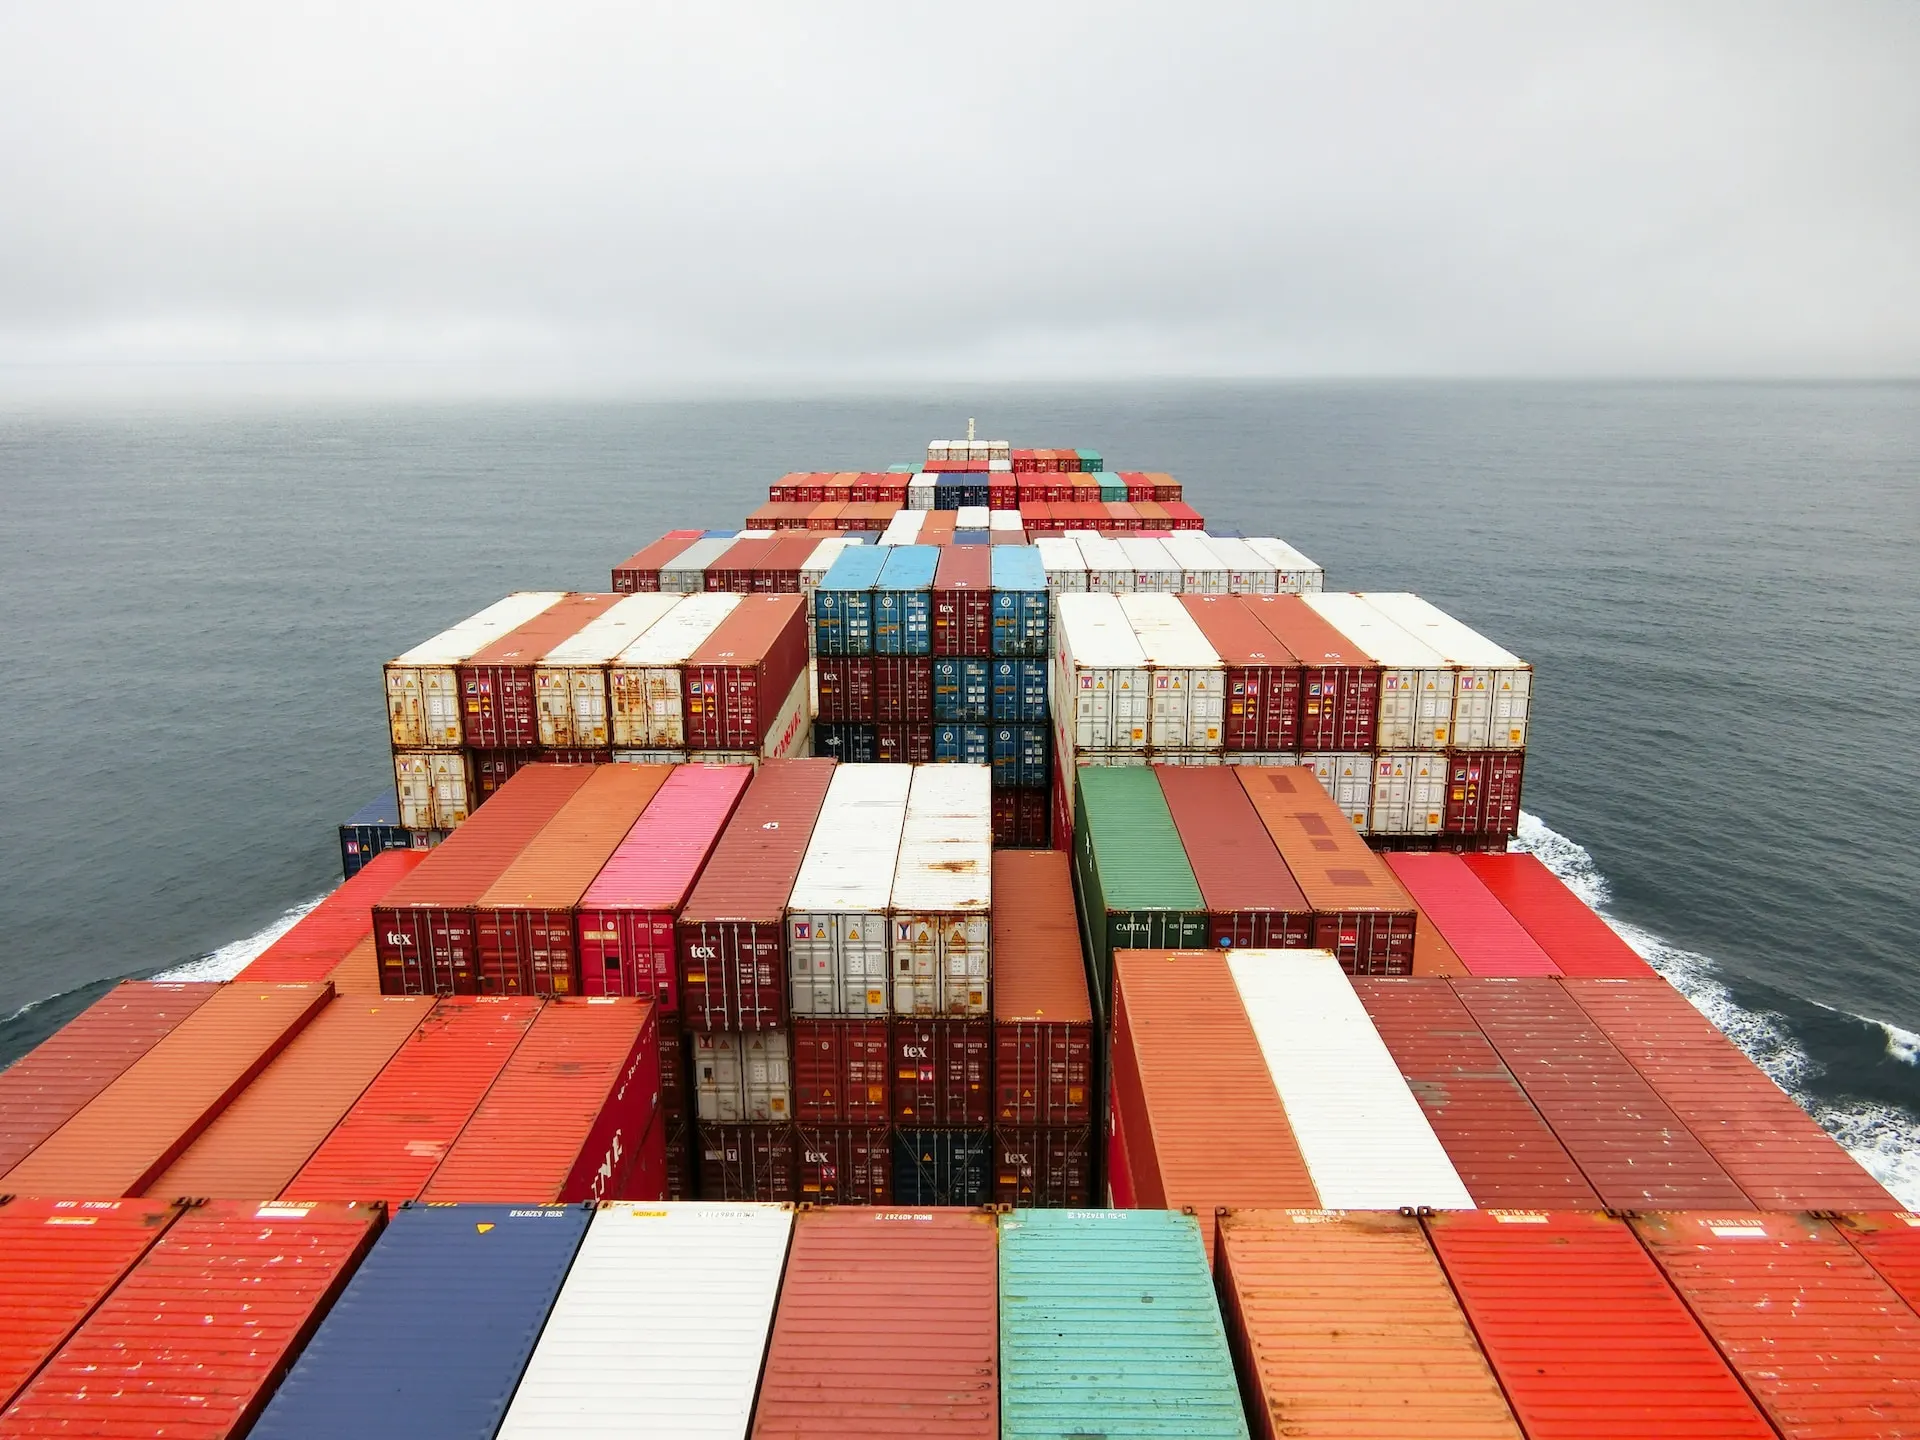 view from the bridge of a container ship somewhere in the middle of the ocean